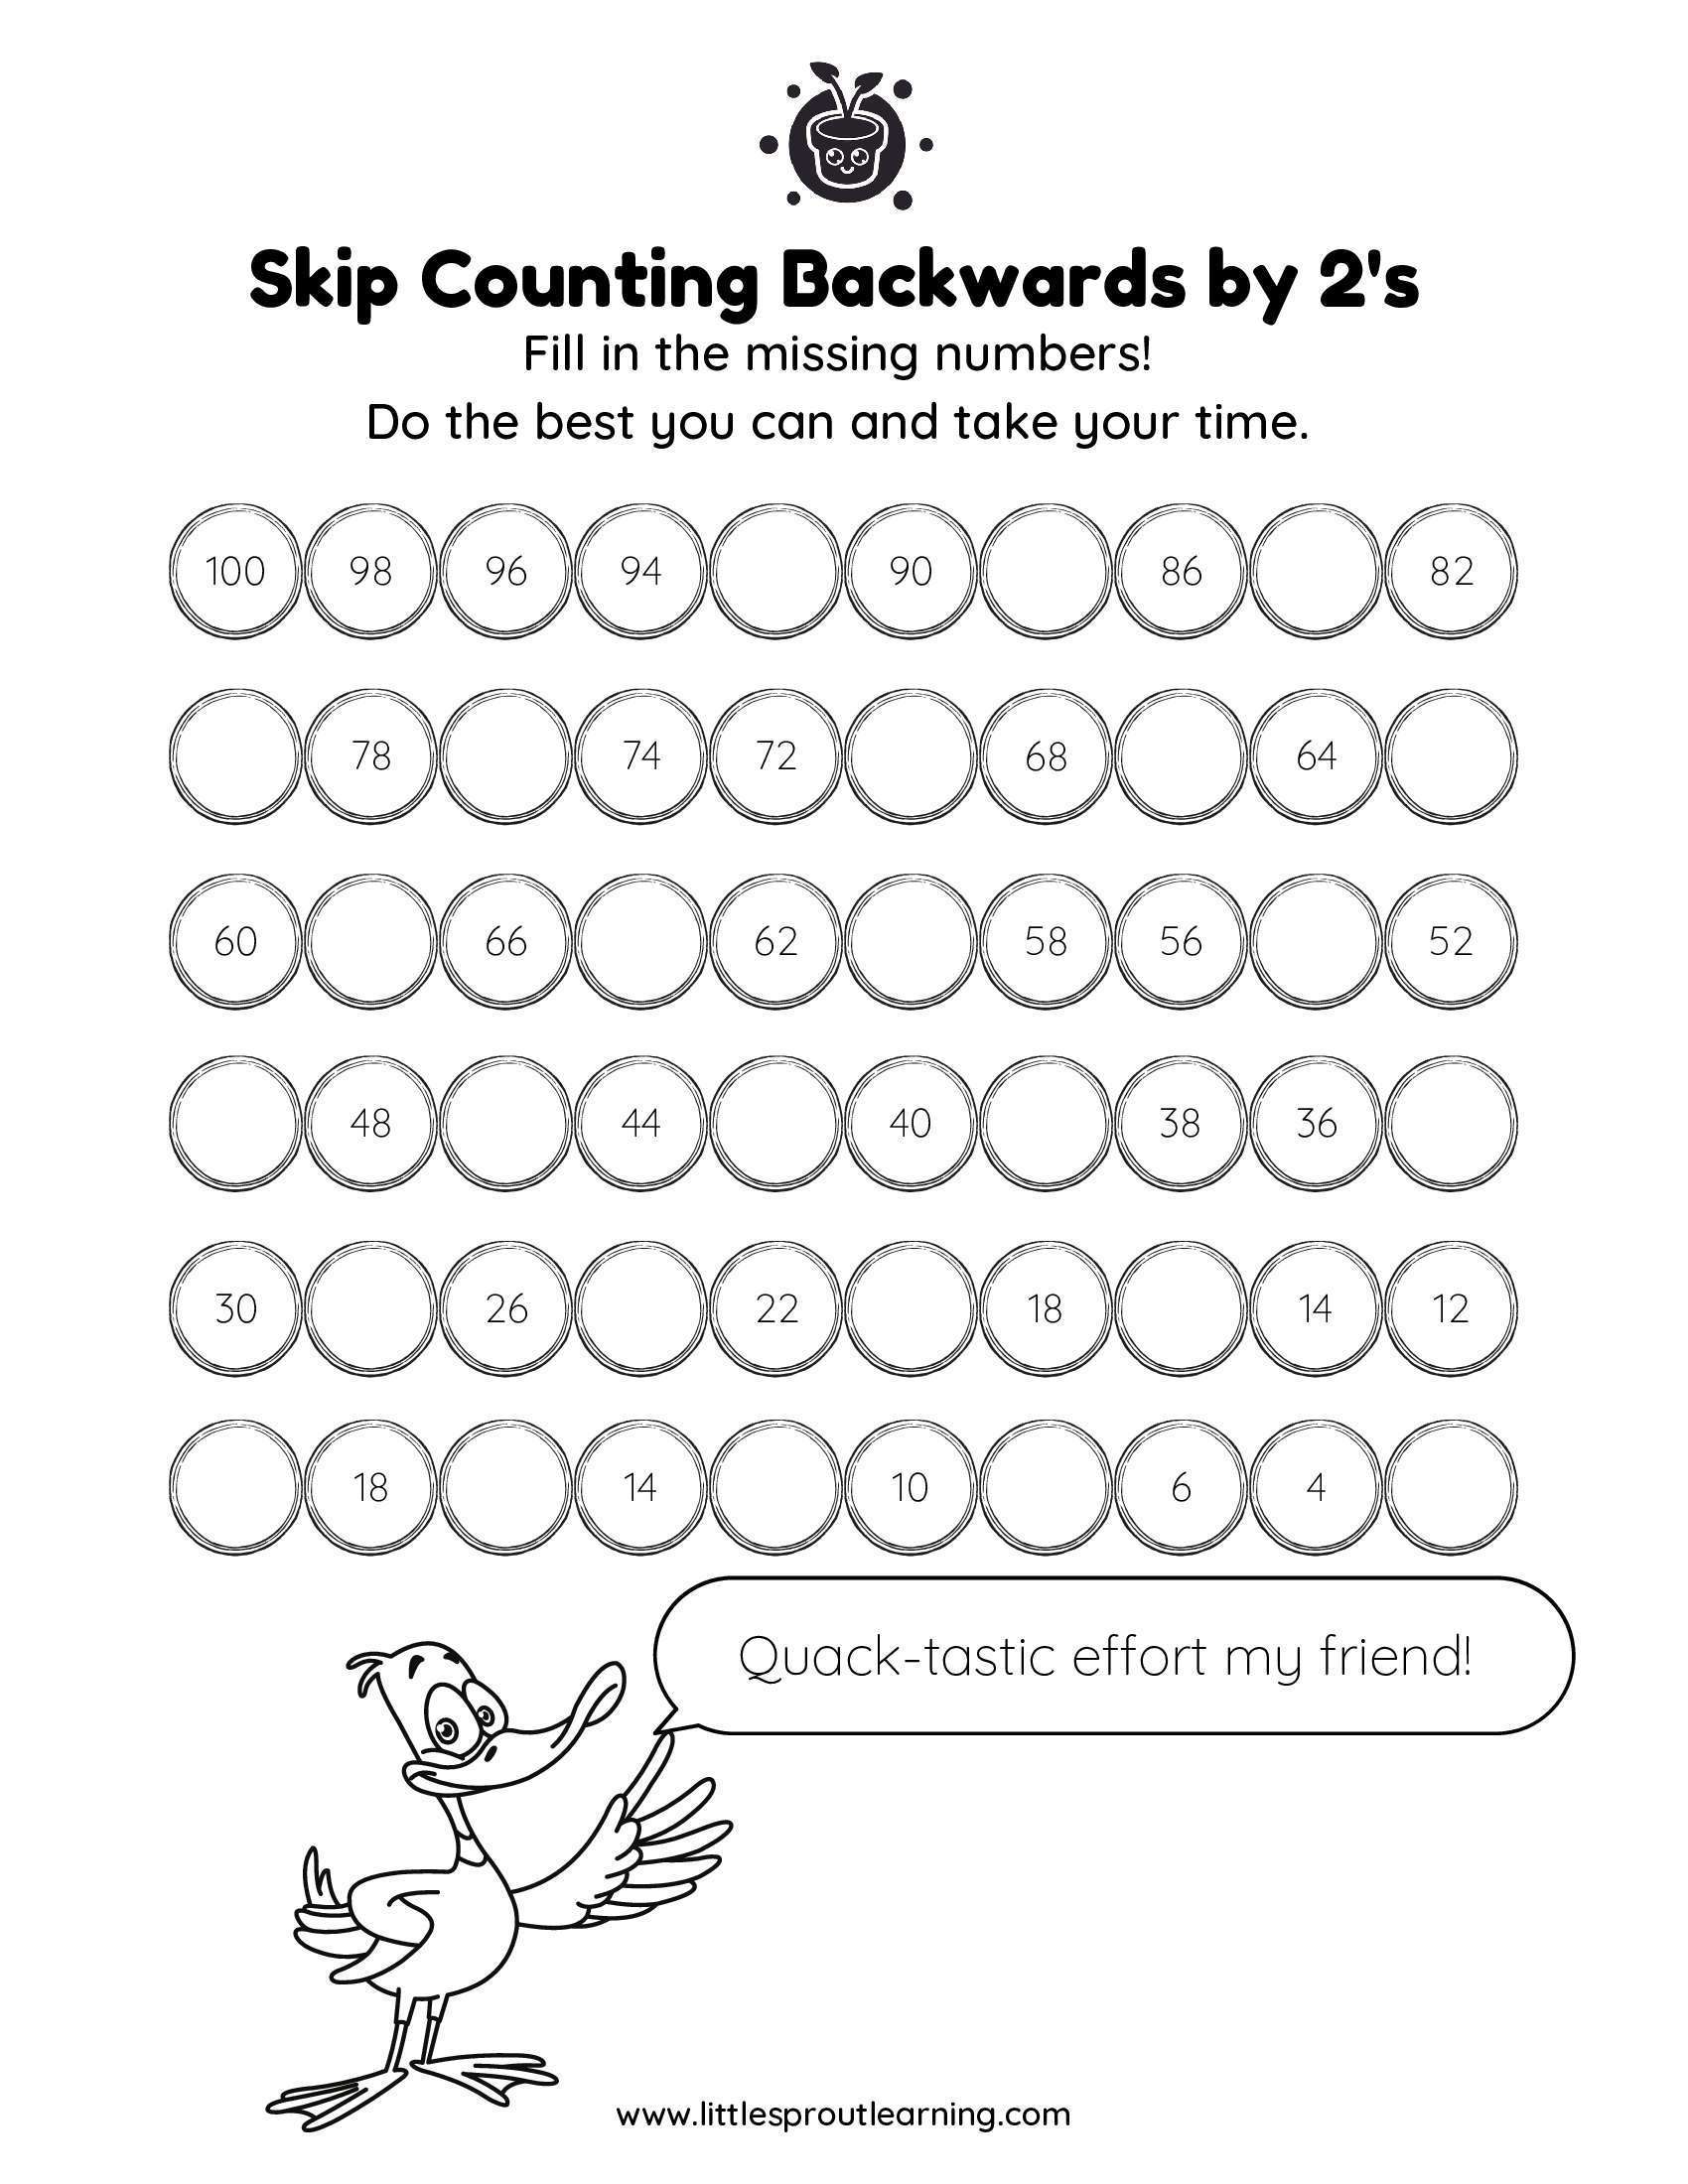 Skip Counting Backwards by 2’s